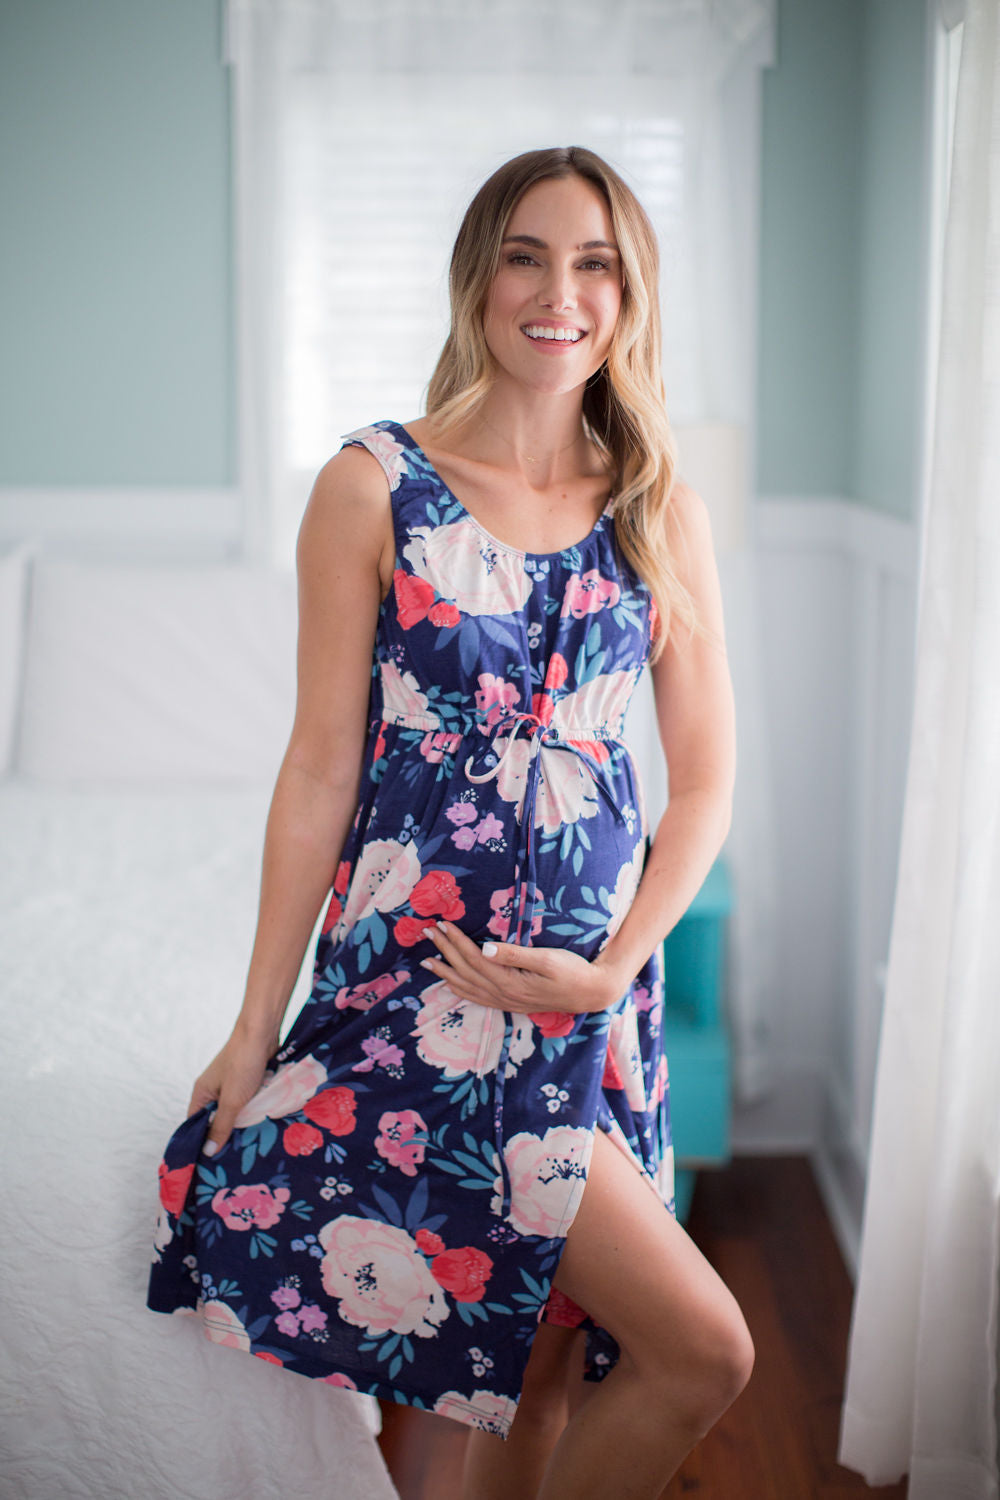 Annabelle labor gown with navy background and a flowered print. Labor gowns are an excellent option for delivery with an elastic waist, snap shoulders, and a wrap waist for coverage.